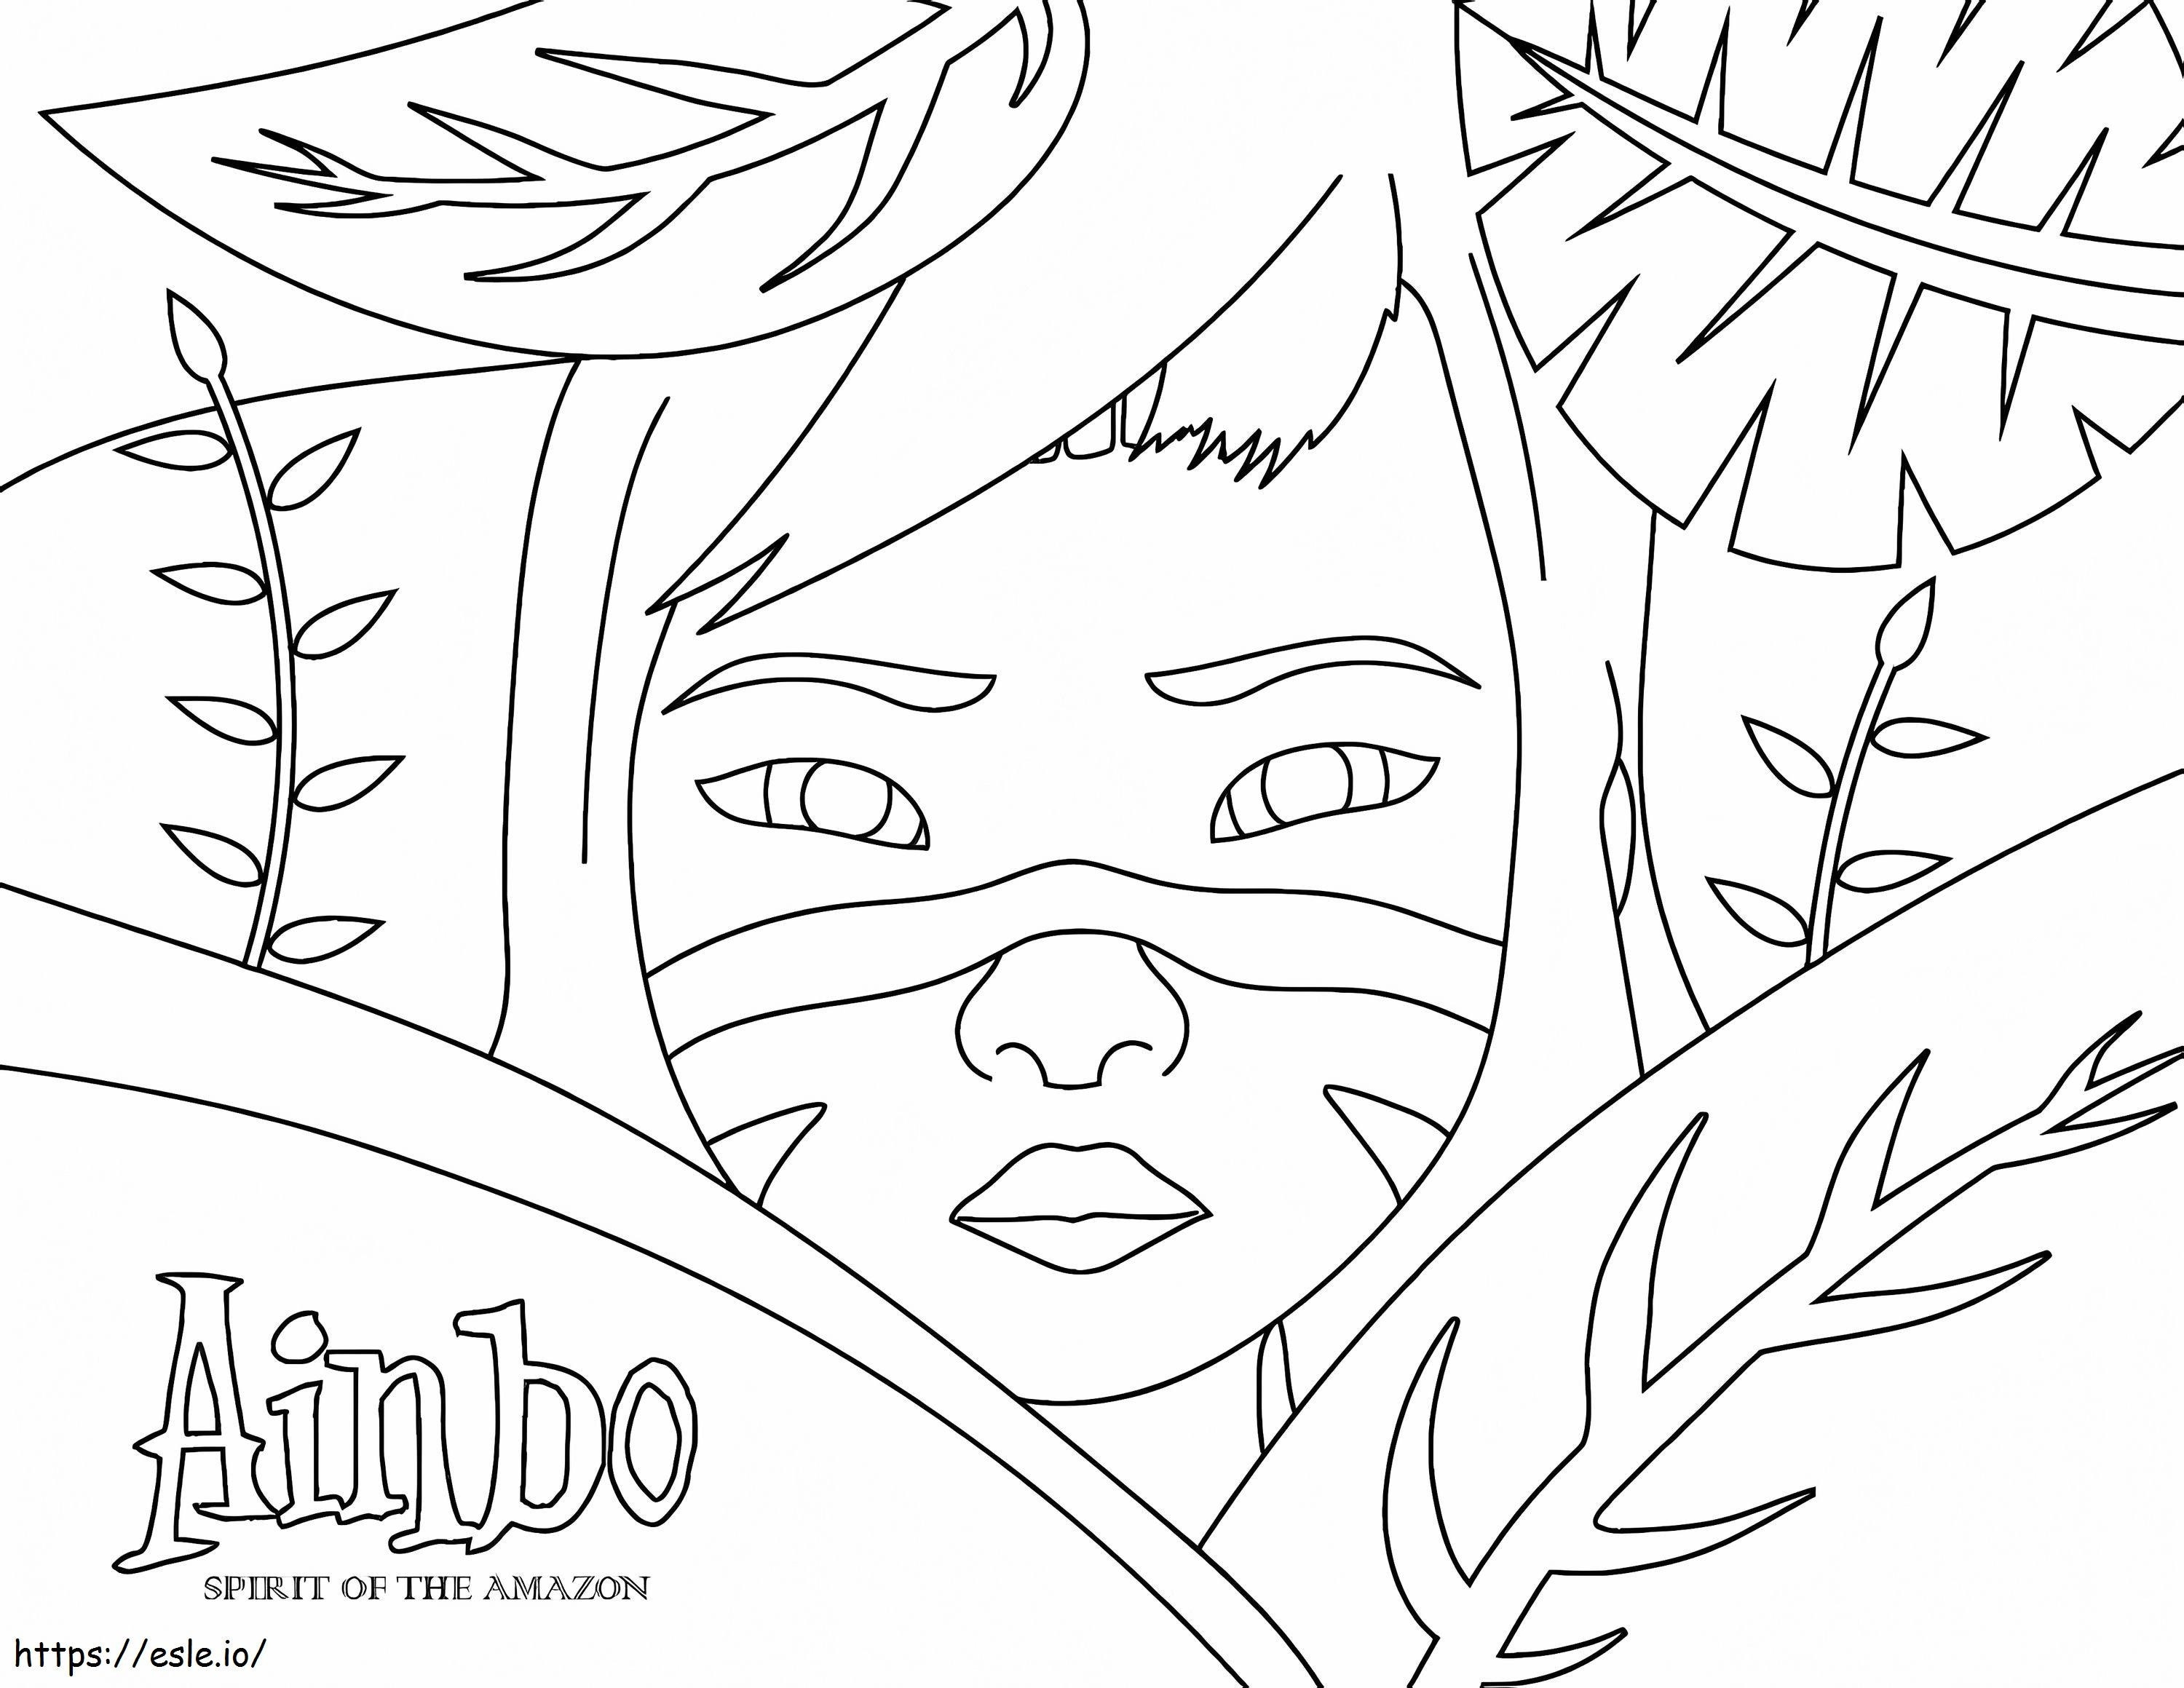 Cool Ainbo coloring page